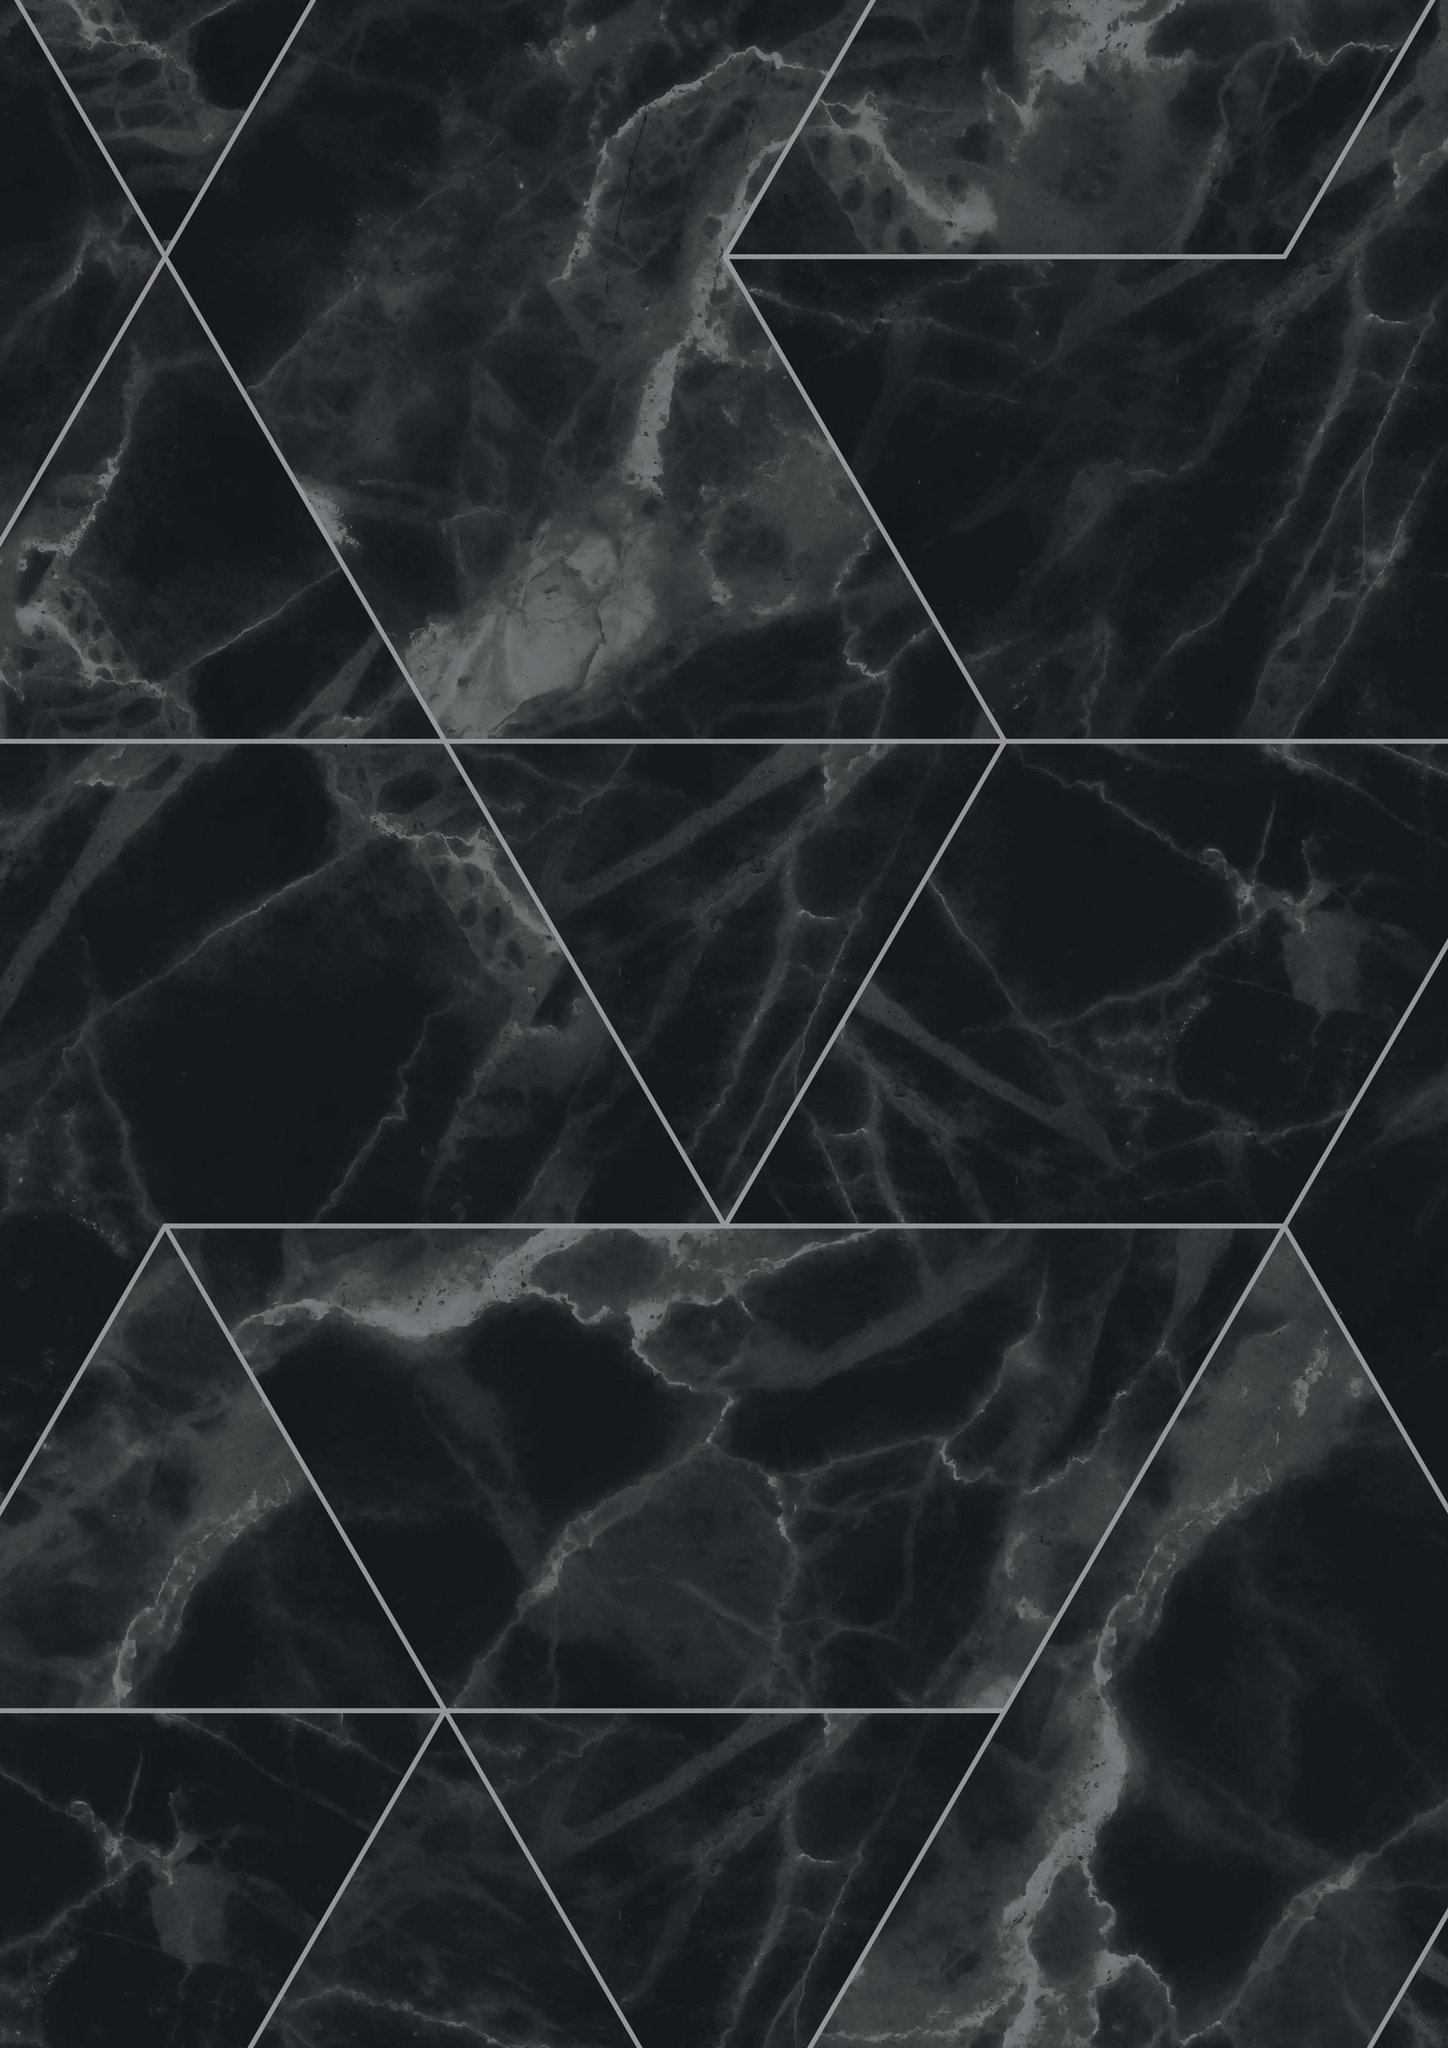 Free download Mosaic Triangles iphone 5 wallpaper Iphone wallpaper ...